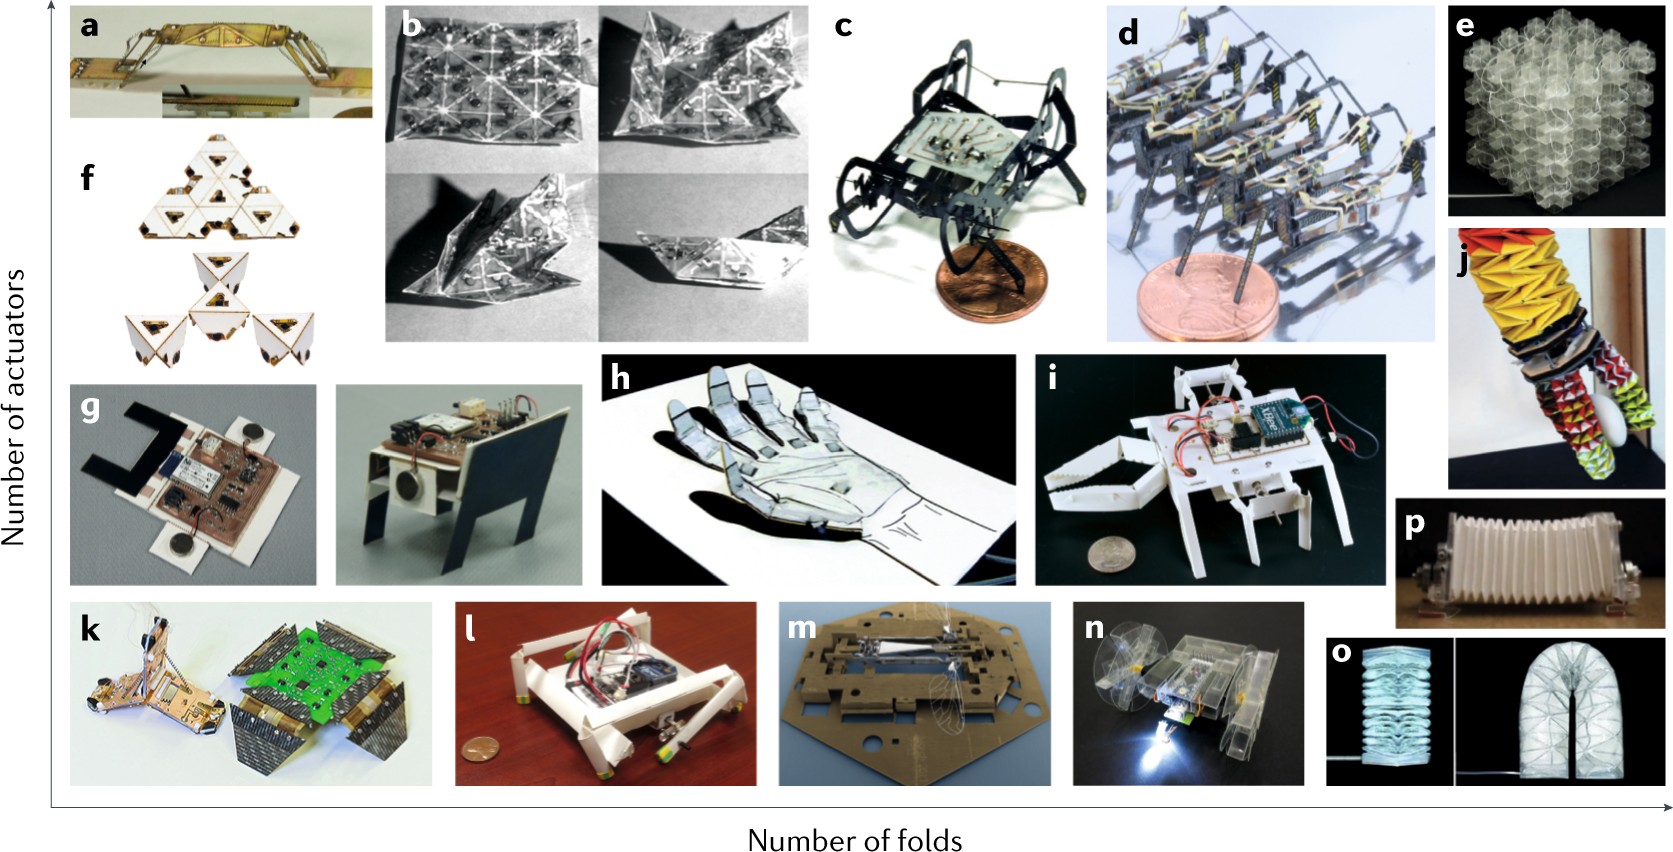 Design, fabrication and control of origami robots | Nature Reviews Materials